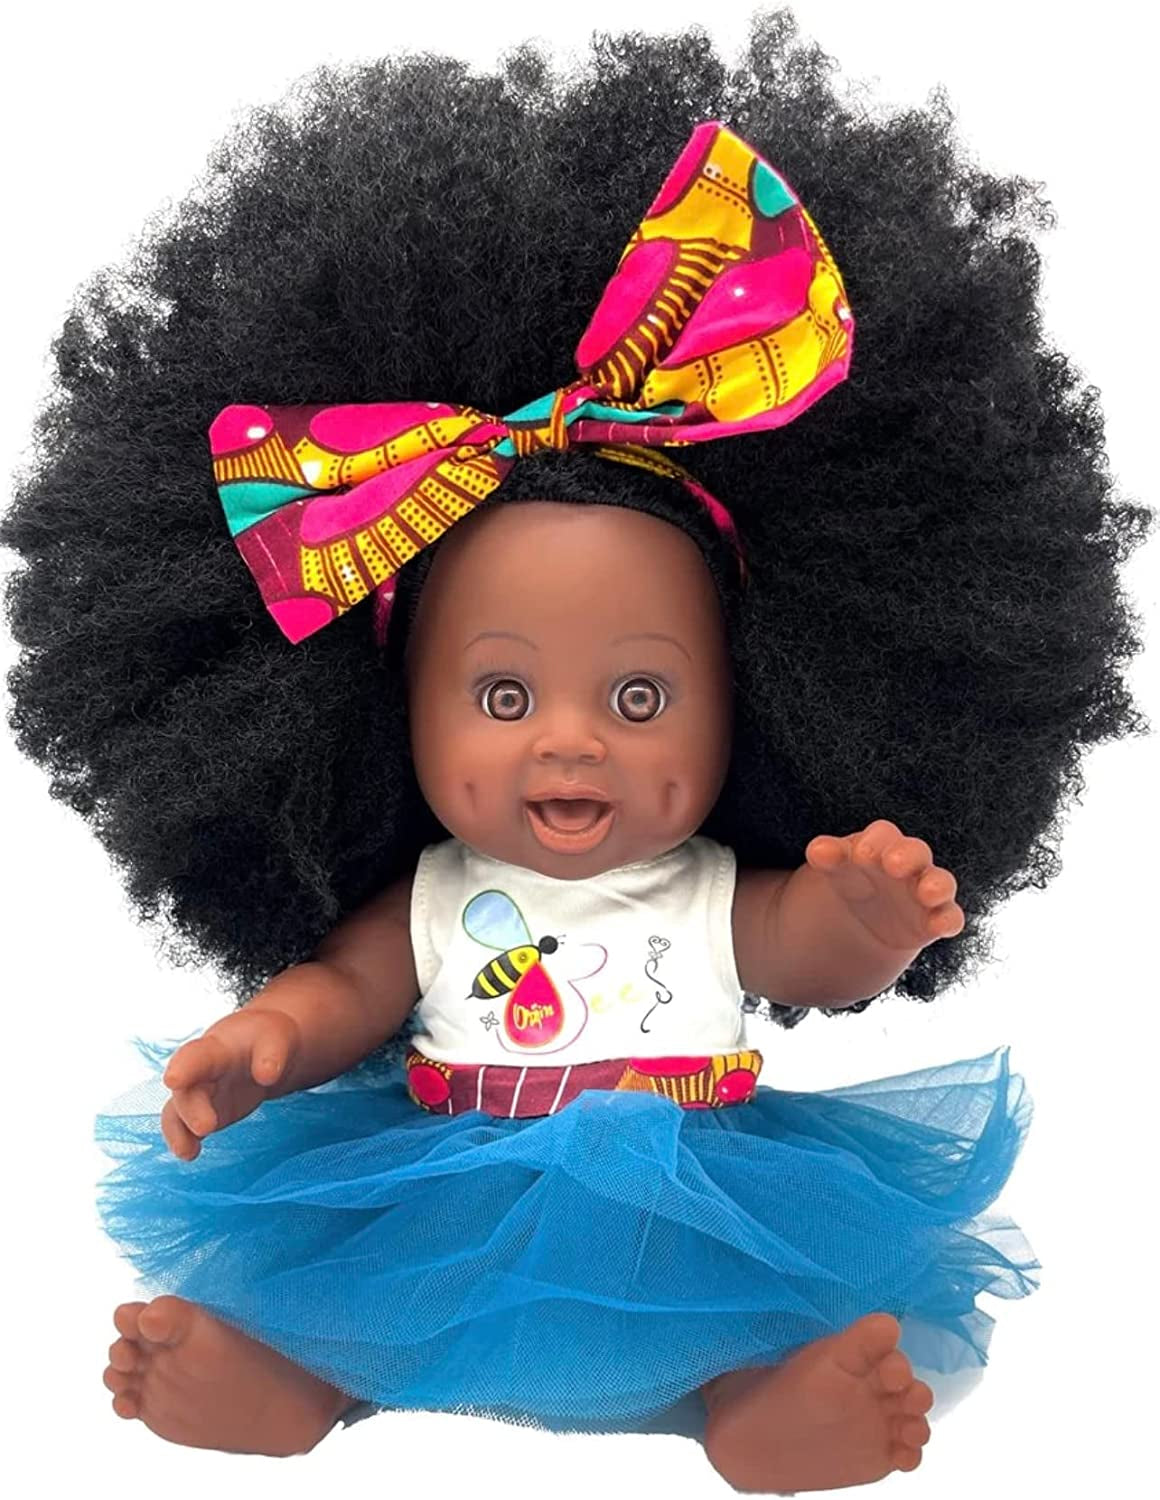 Fro Love Baby Bee Doll - Oprah'S Favorite Things African American Doll, Black Doll, Latino Doll, Afro Doll, Baby Doll, Curly Hair Doll, Baby Doll, African Doll, Birthday Gift